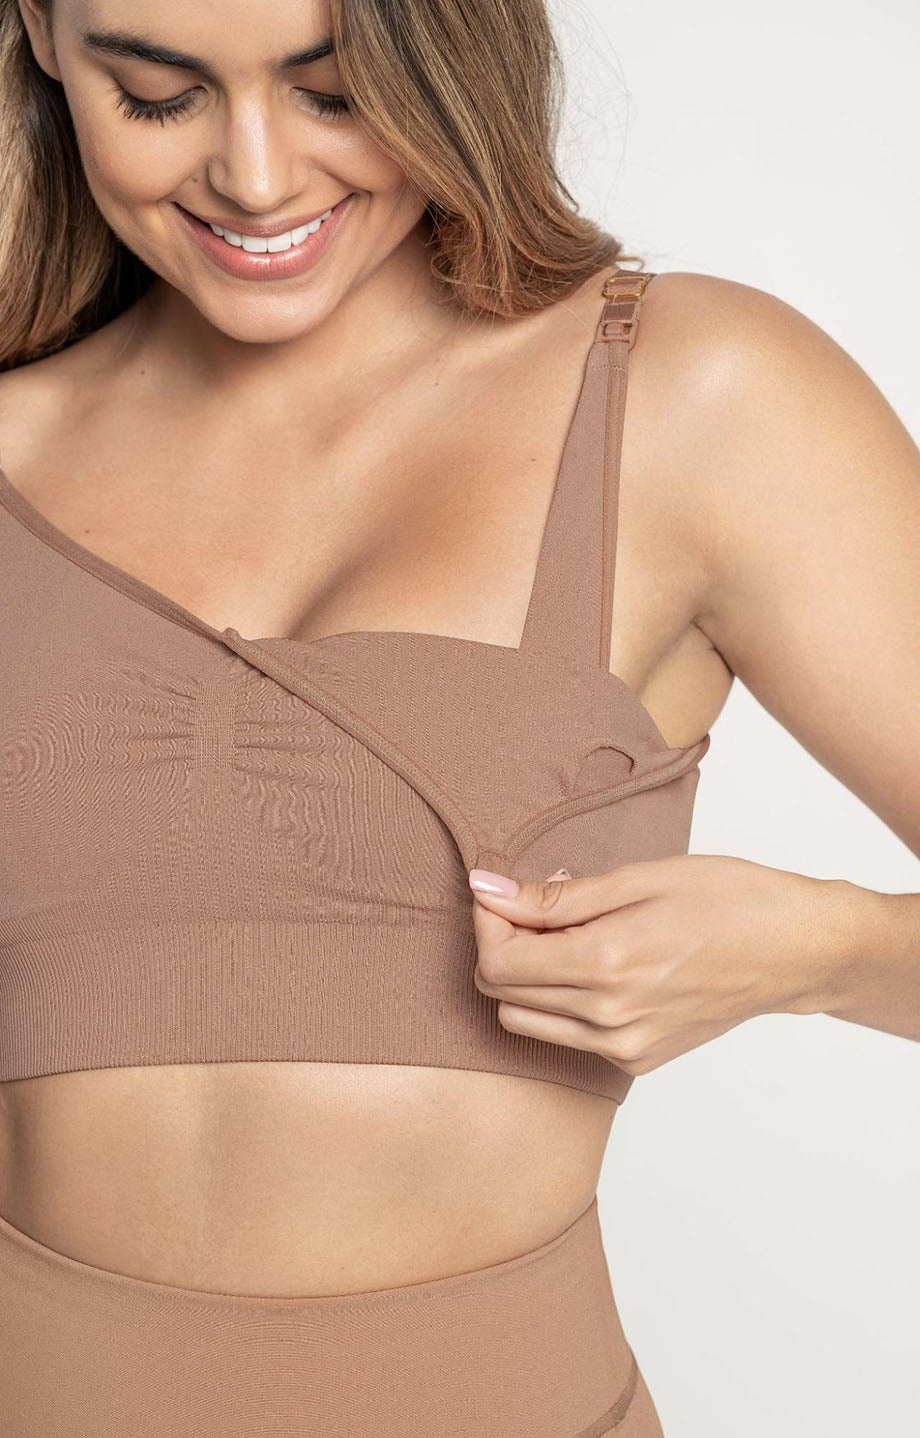 Introducing our Nursing Bra Collection. Worry-less, Stress-free